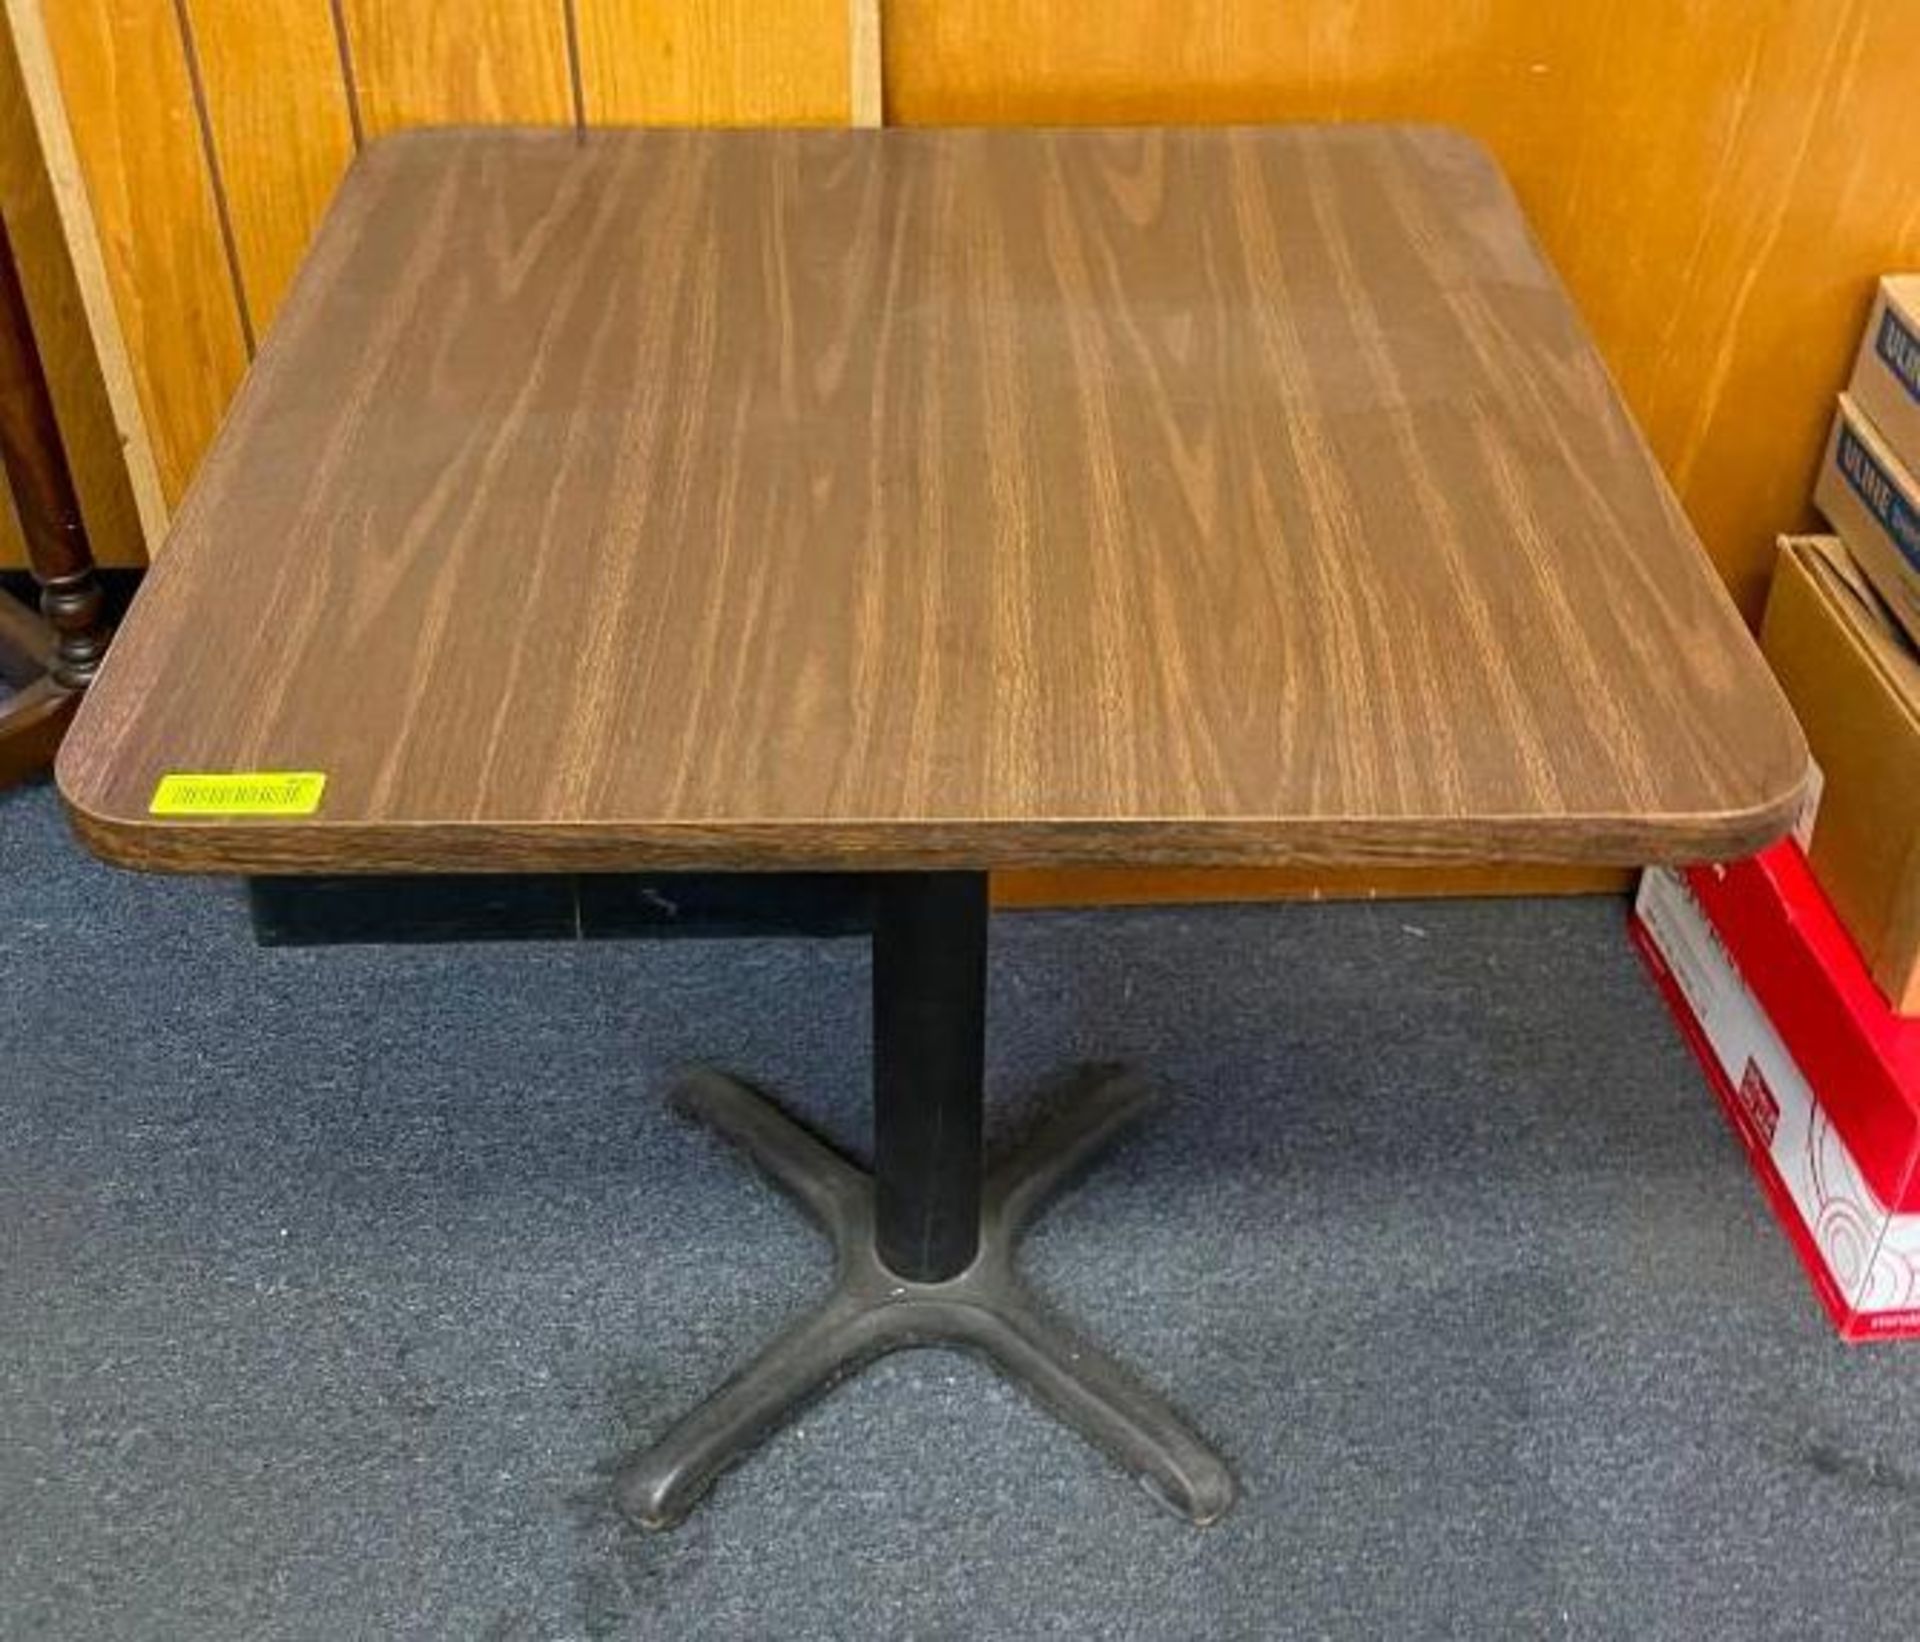 COMPOSITE DINING TABLE SIZE: 30"X30" LOCATION: OFFICE QTY: 1